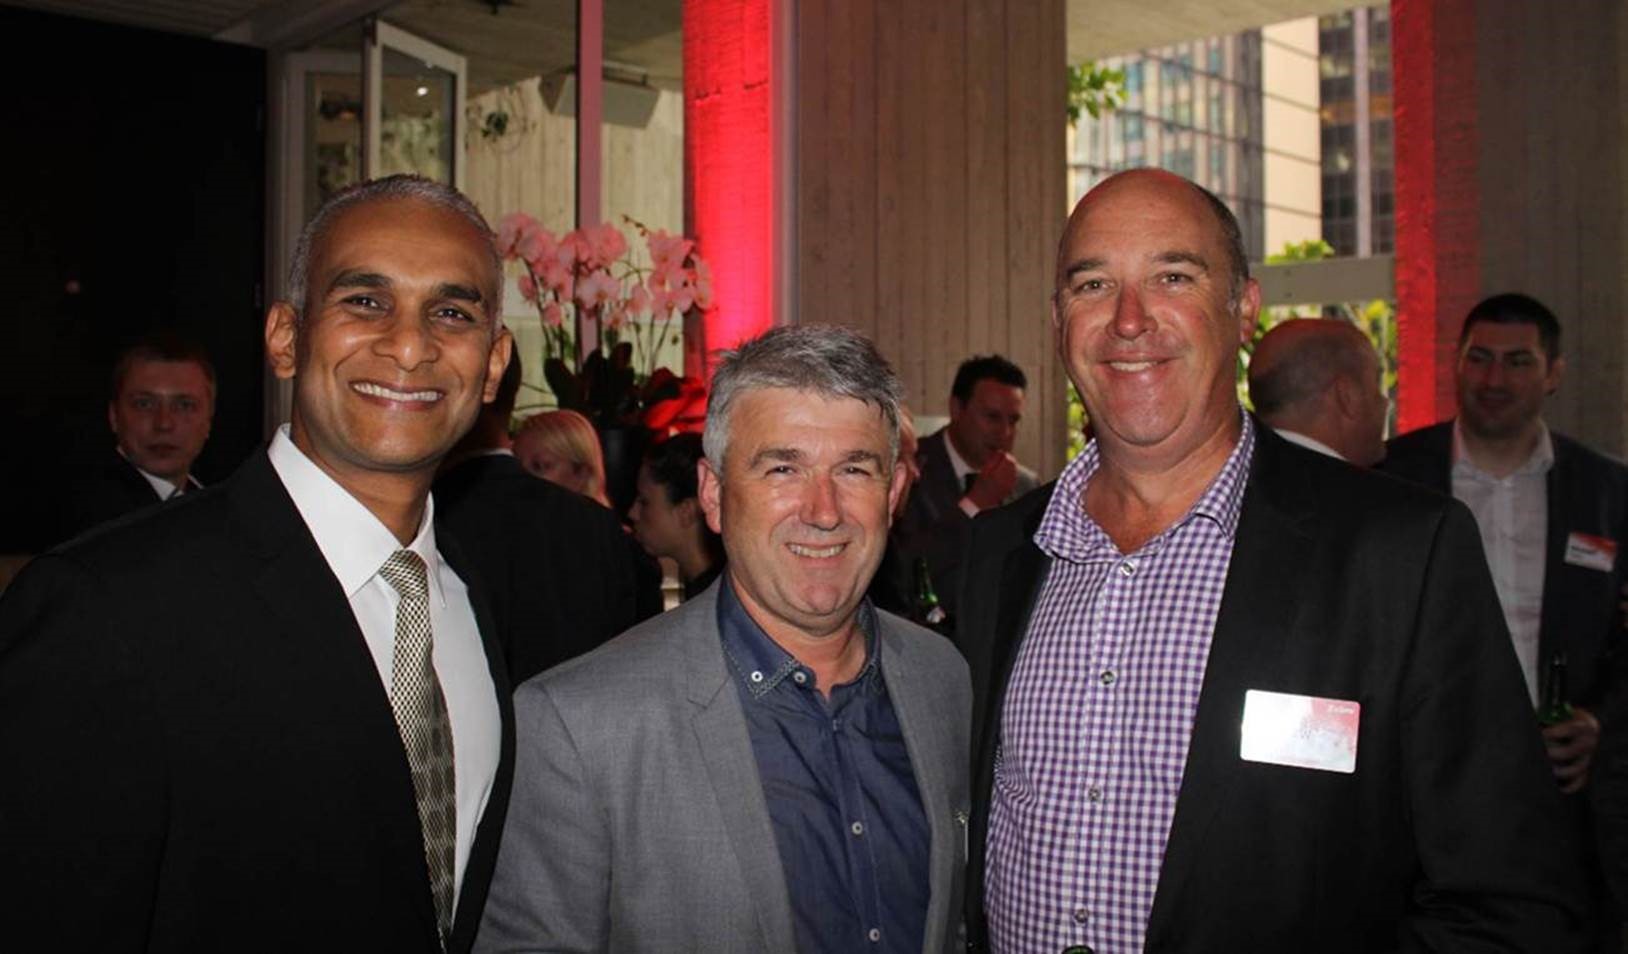 Roshan Mendis, senior vice president of Sabre Travel Network Asia Pacific, flew to Australia to catch up with customers at the event. He is joined here by Richard Morgan regional director, South Pacific for Sabre Travel Network and Andrew Jones, director of Andrew Jones Travel (left to right).